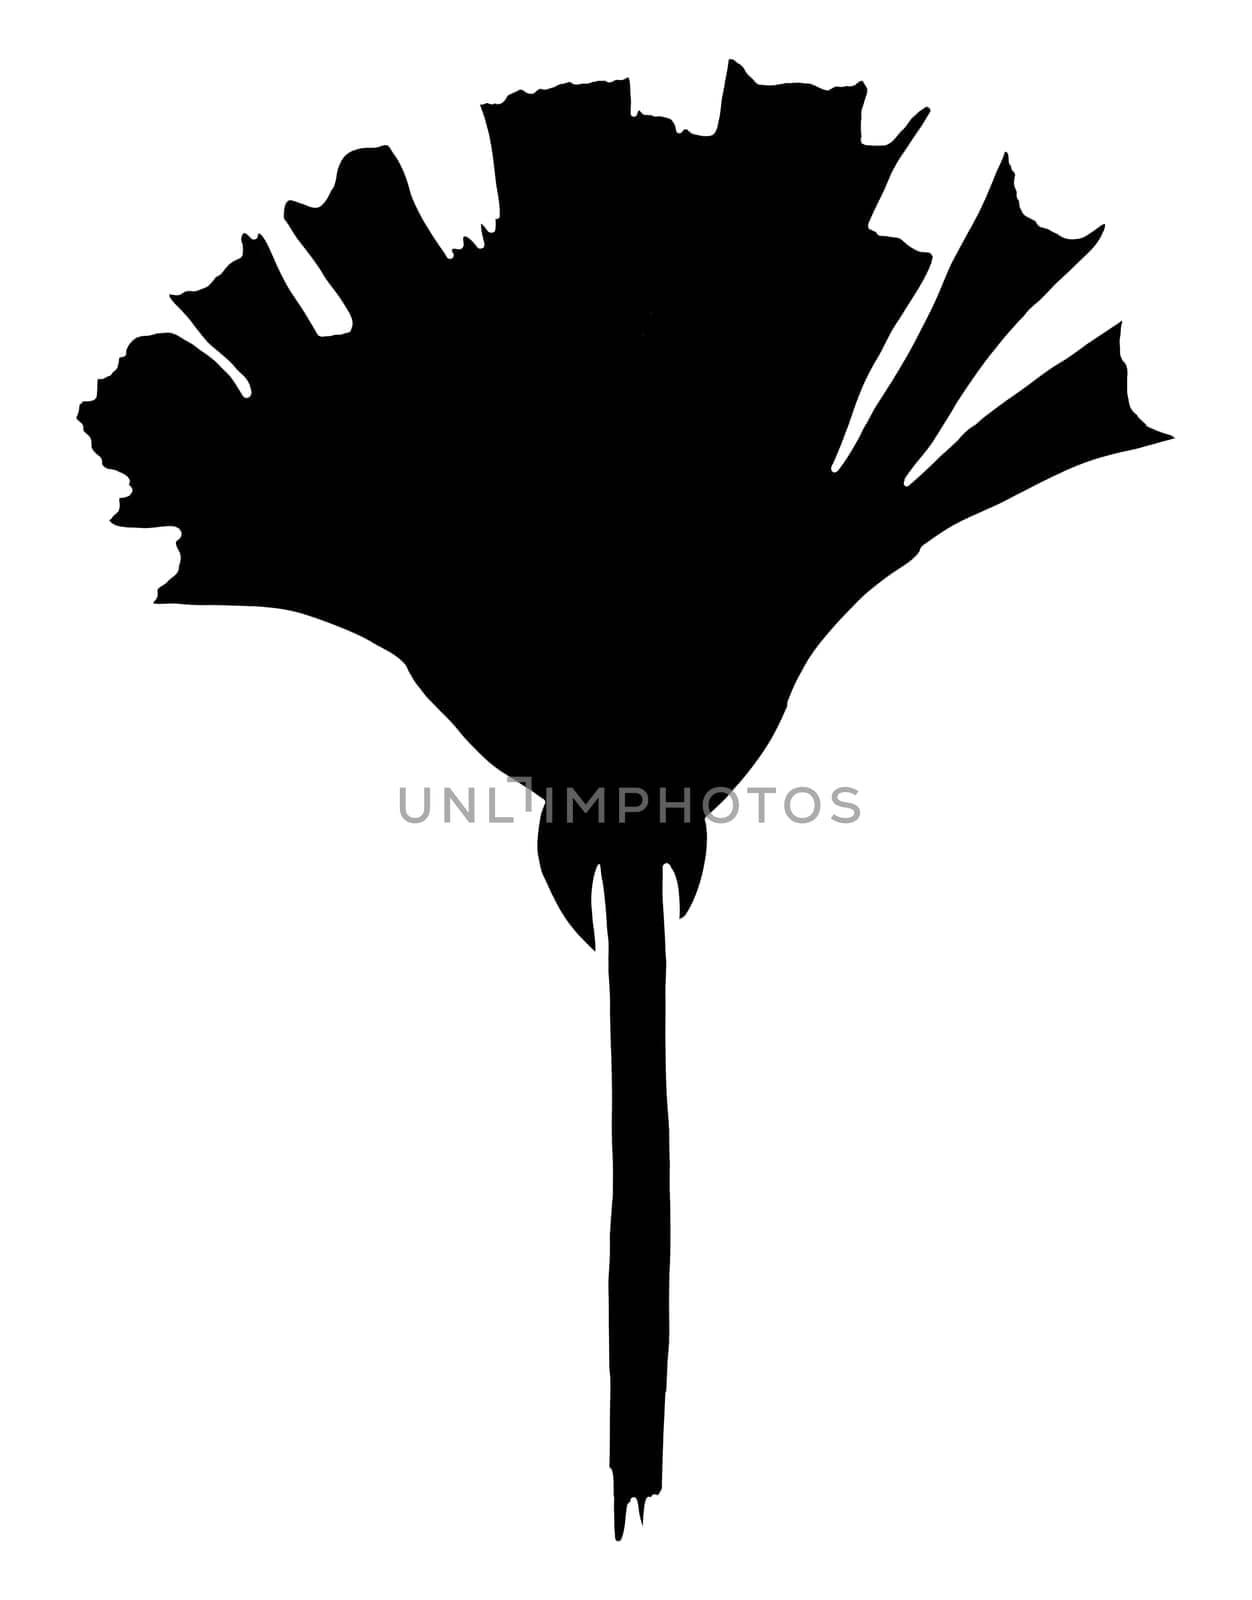 Hand Drawn Flower Silhouette. Black Floral Illustration. Plant Silhouette Isolated on White Background.